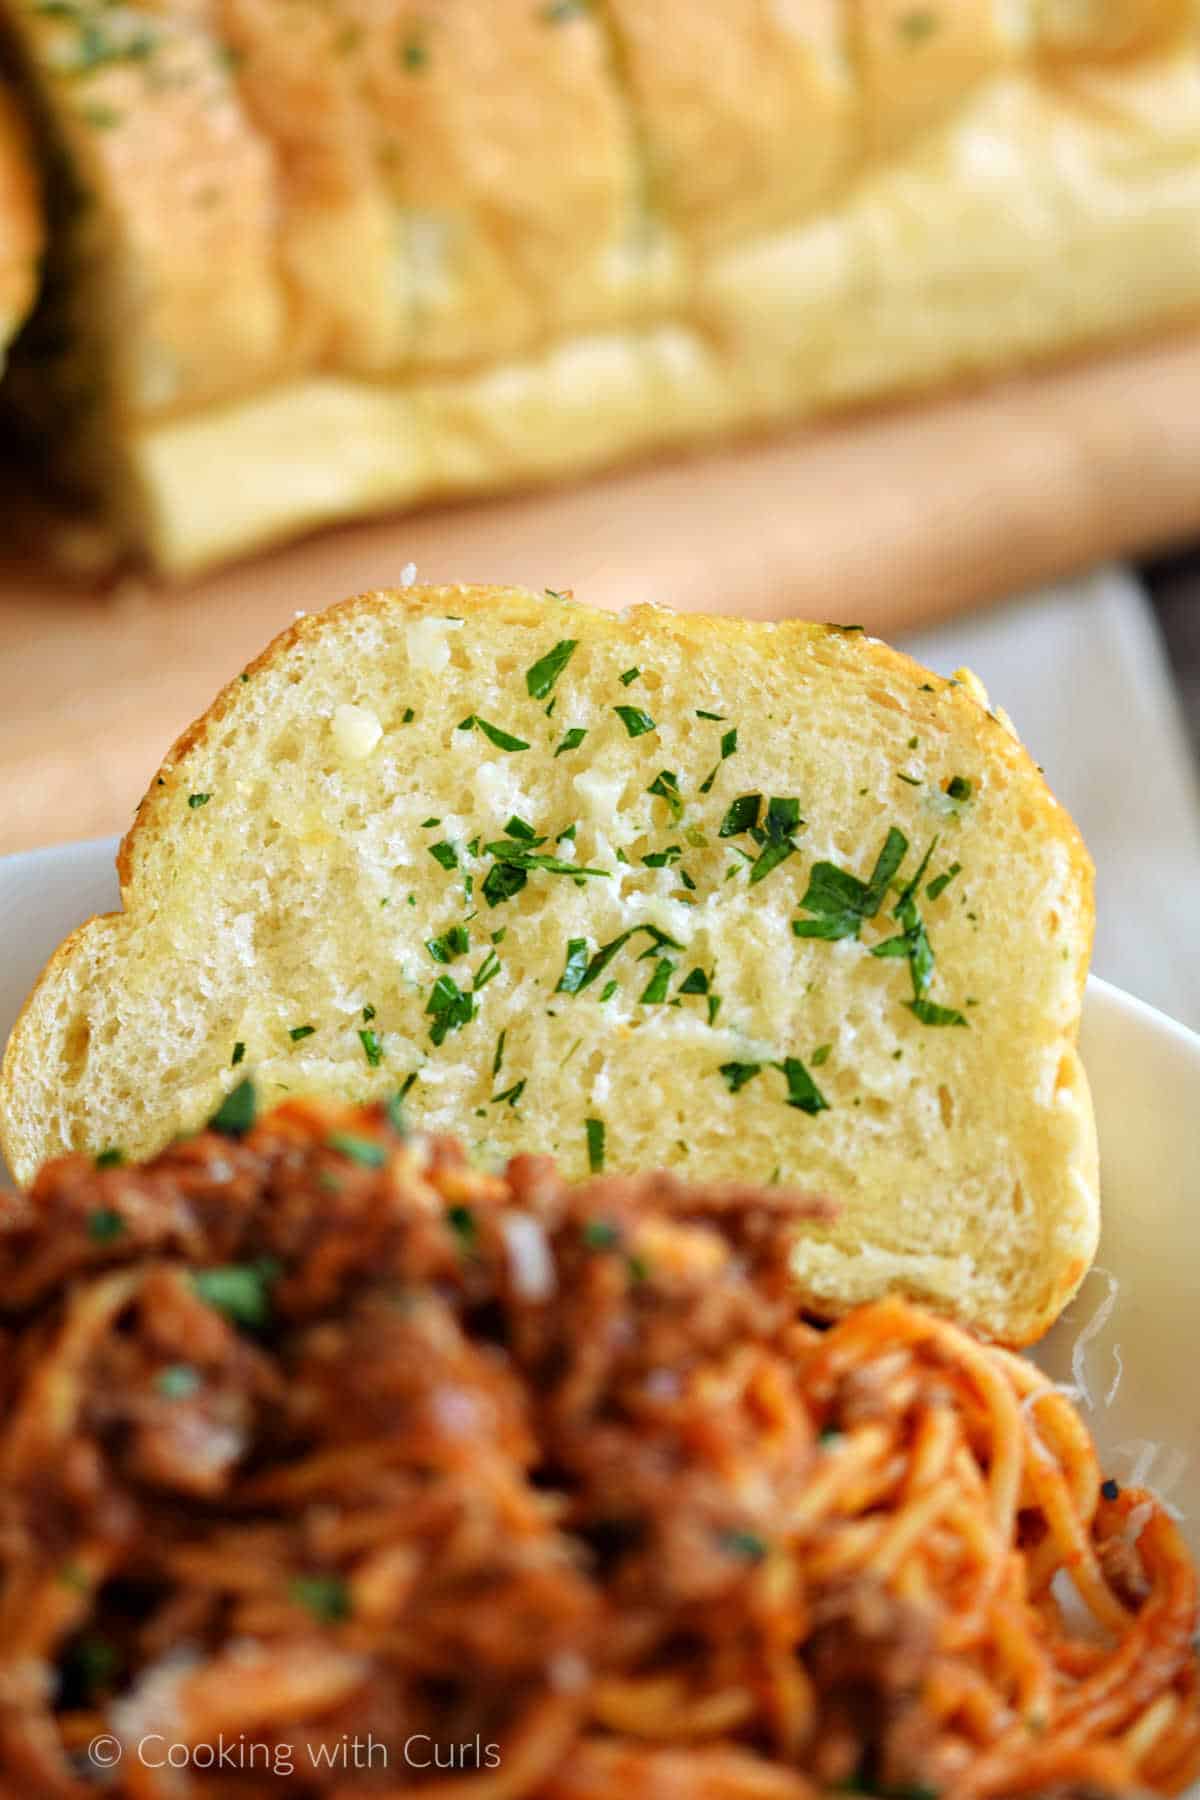 A slice of garlic bread on the edge of a bowl filled with spaghetti.